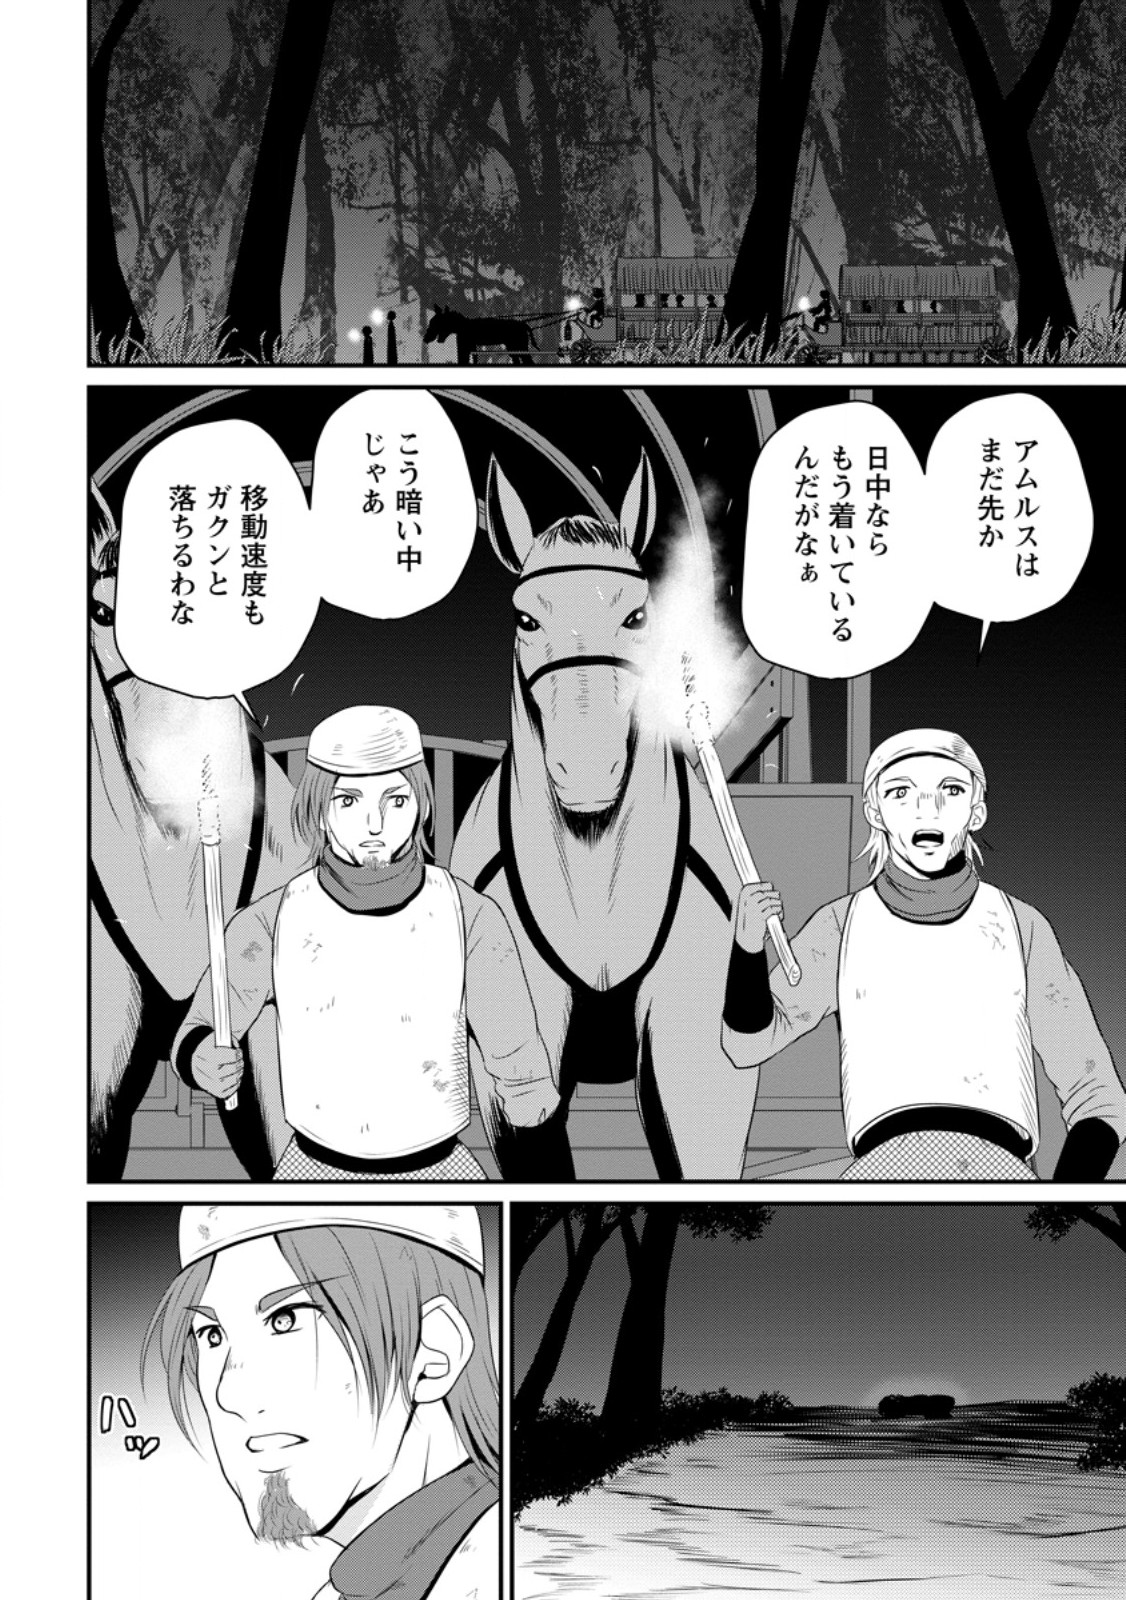 The Frontier Life of The Low-Class Ossan Healer And The Lovery Girl - Chapter 48.1 - Page 2